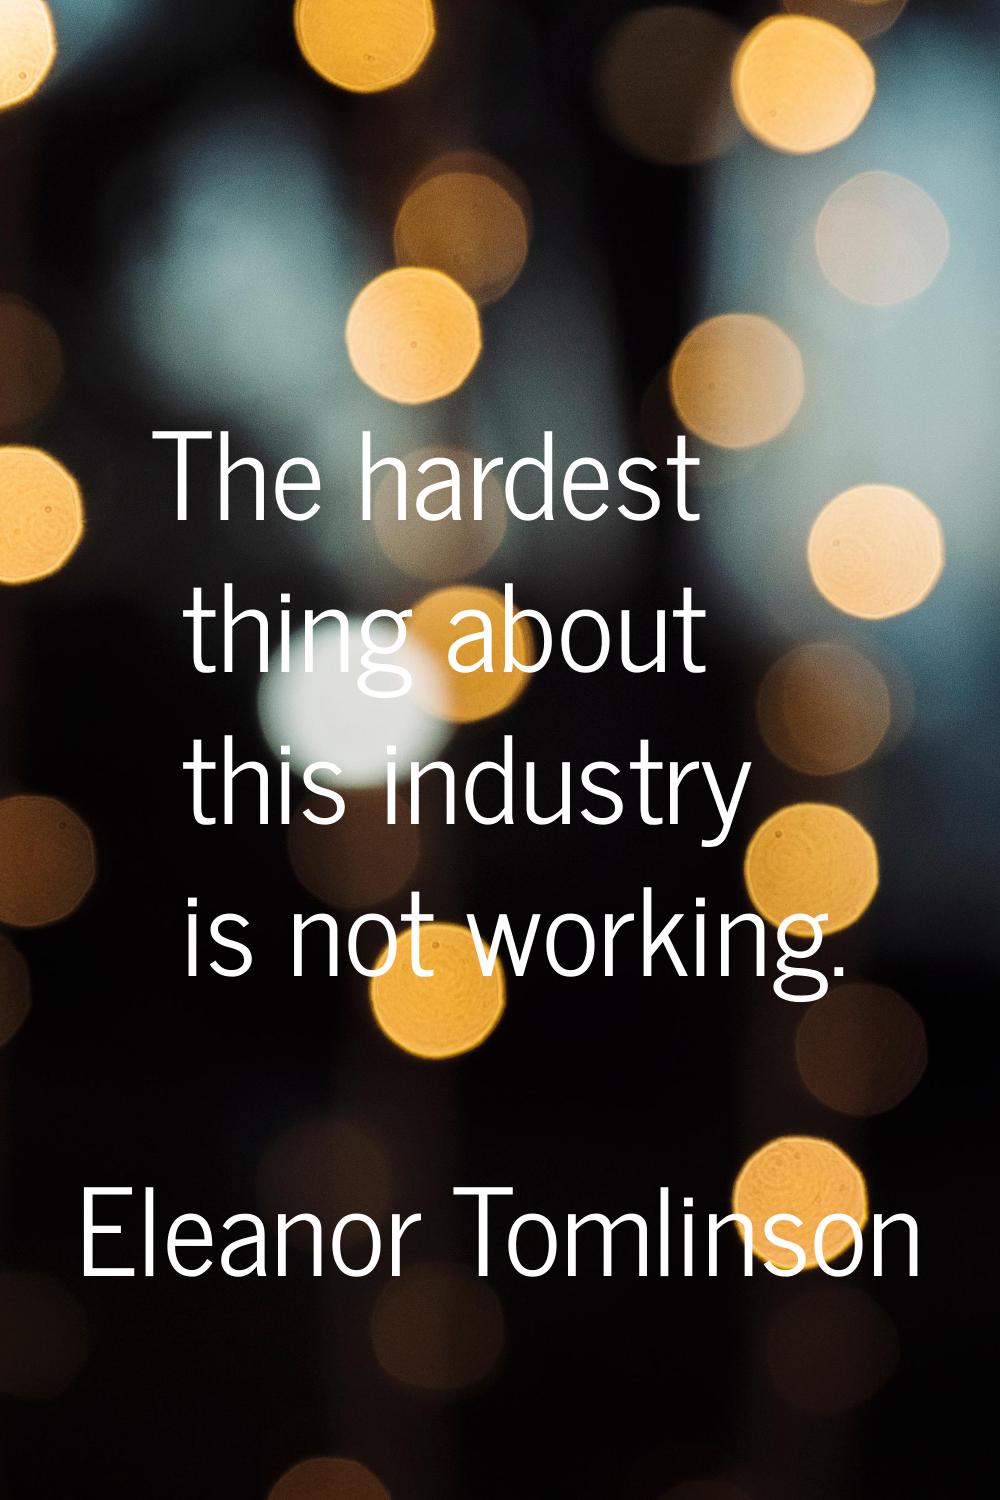 The hardest thing about this industry is not working.